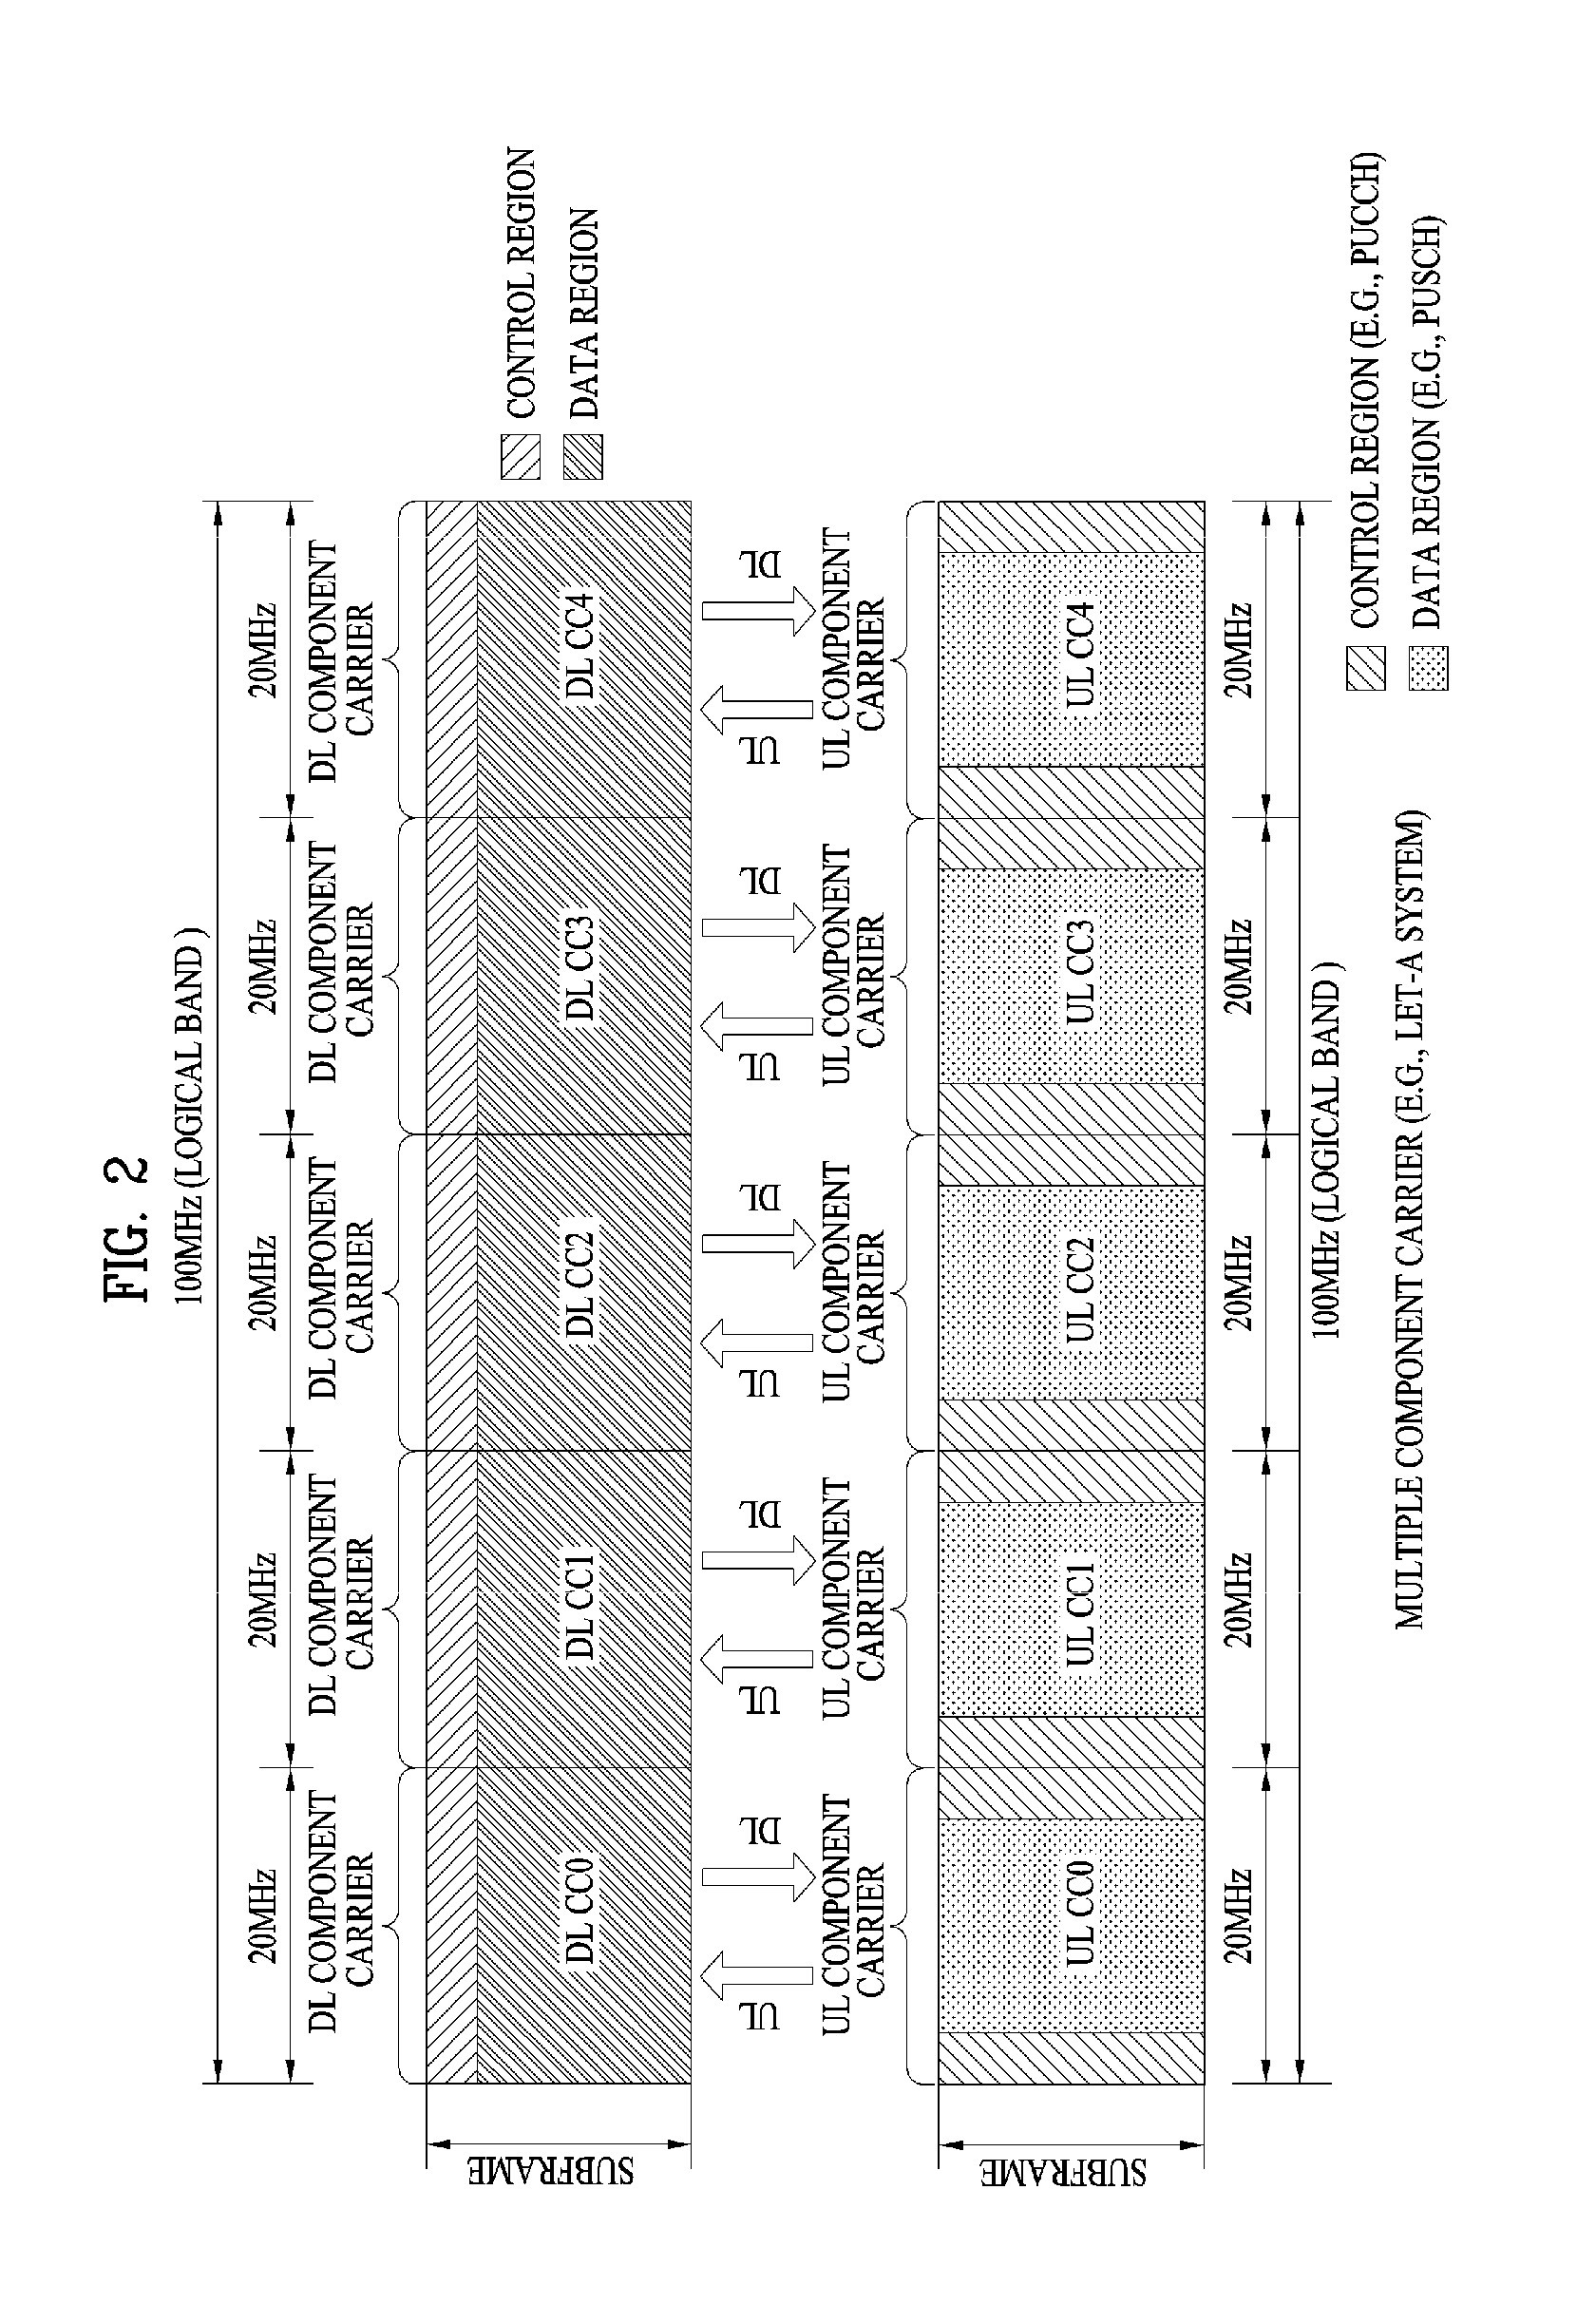 Method of configuring dual connectivity to ue in heterogeneous cell deployment